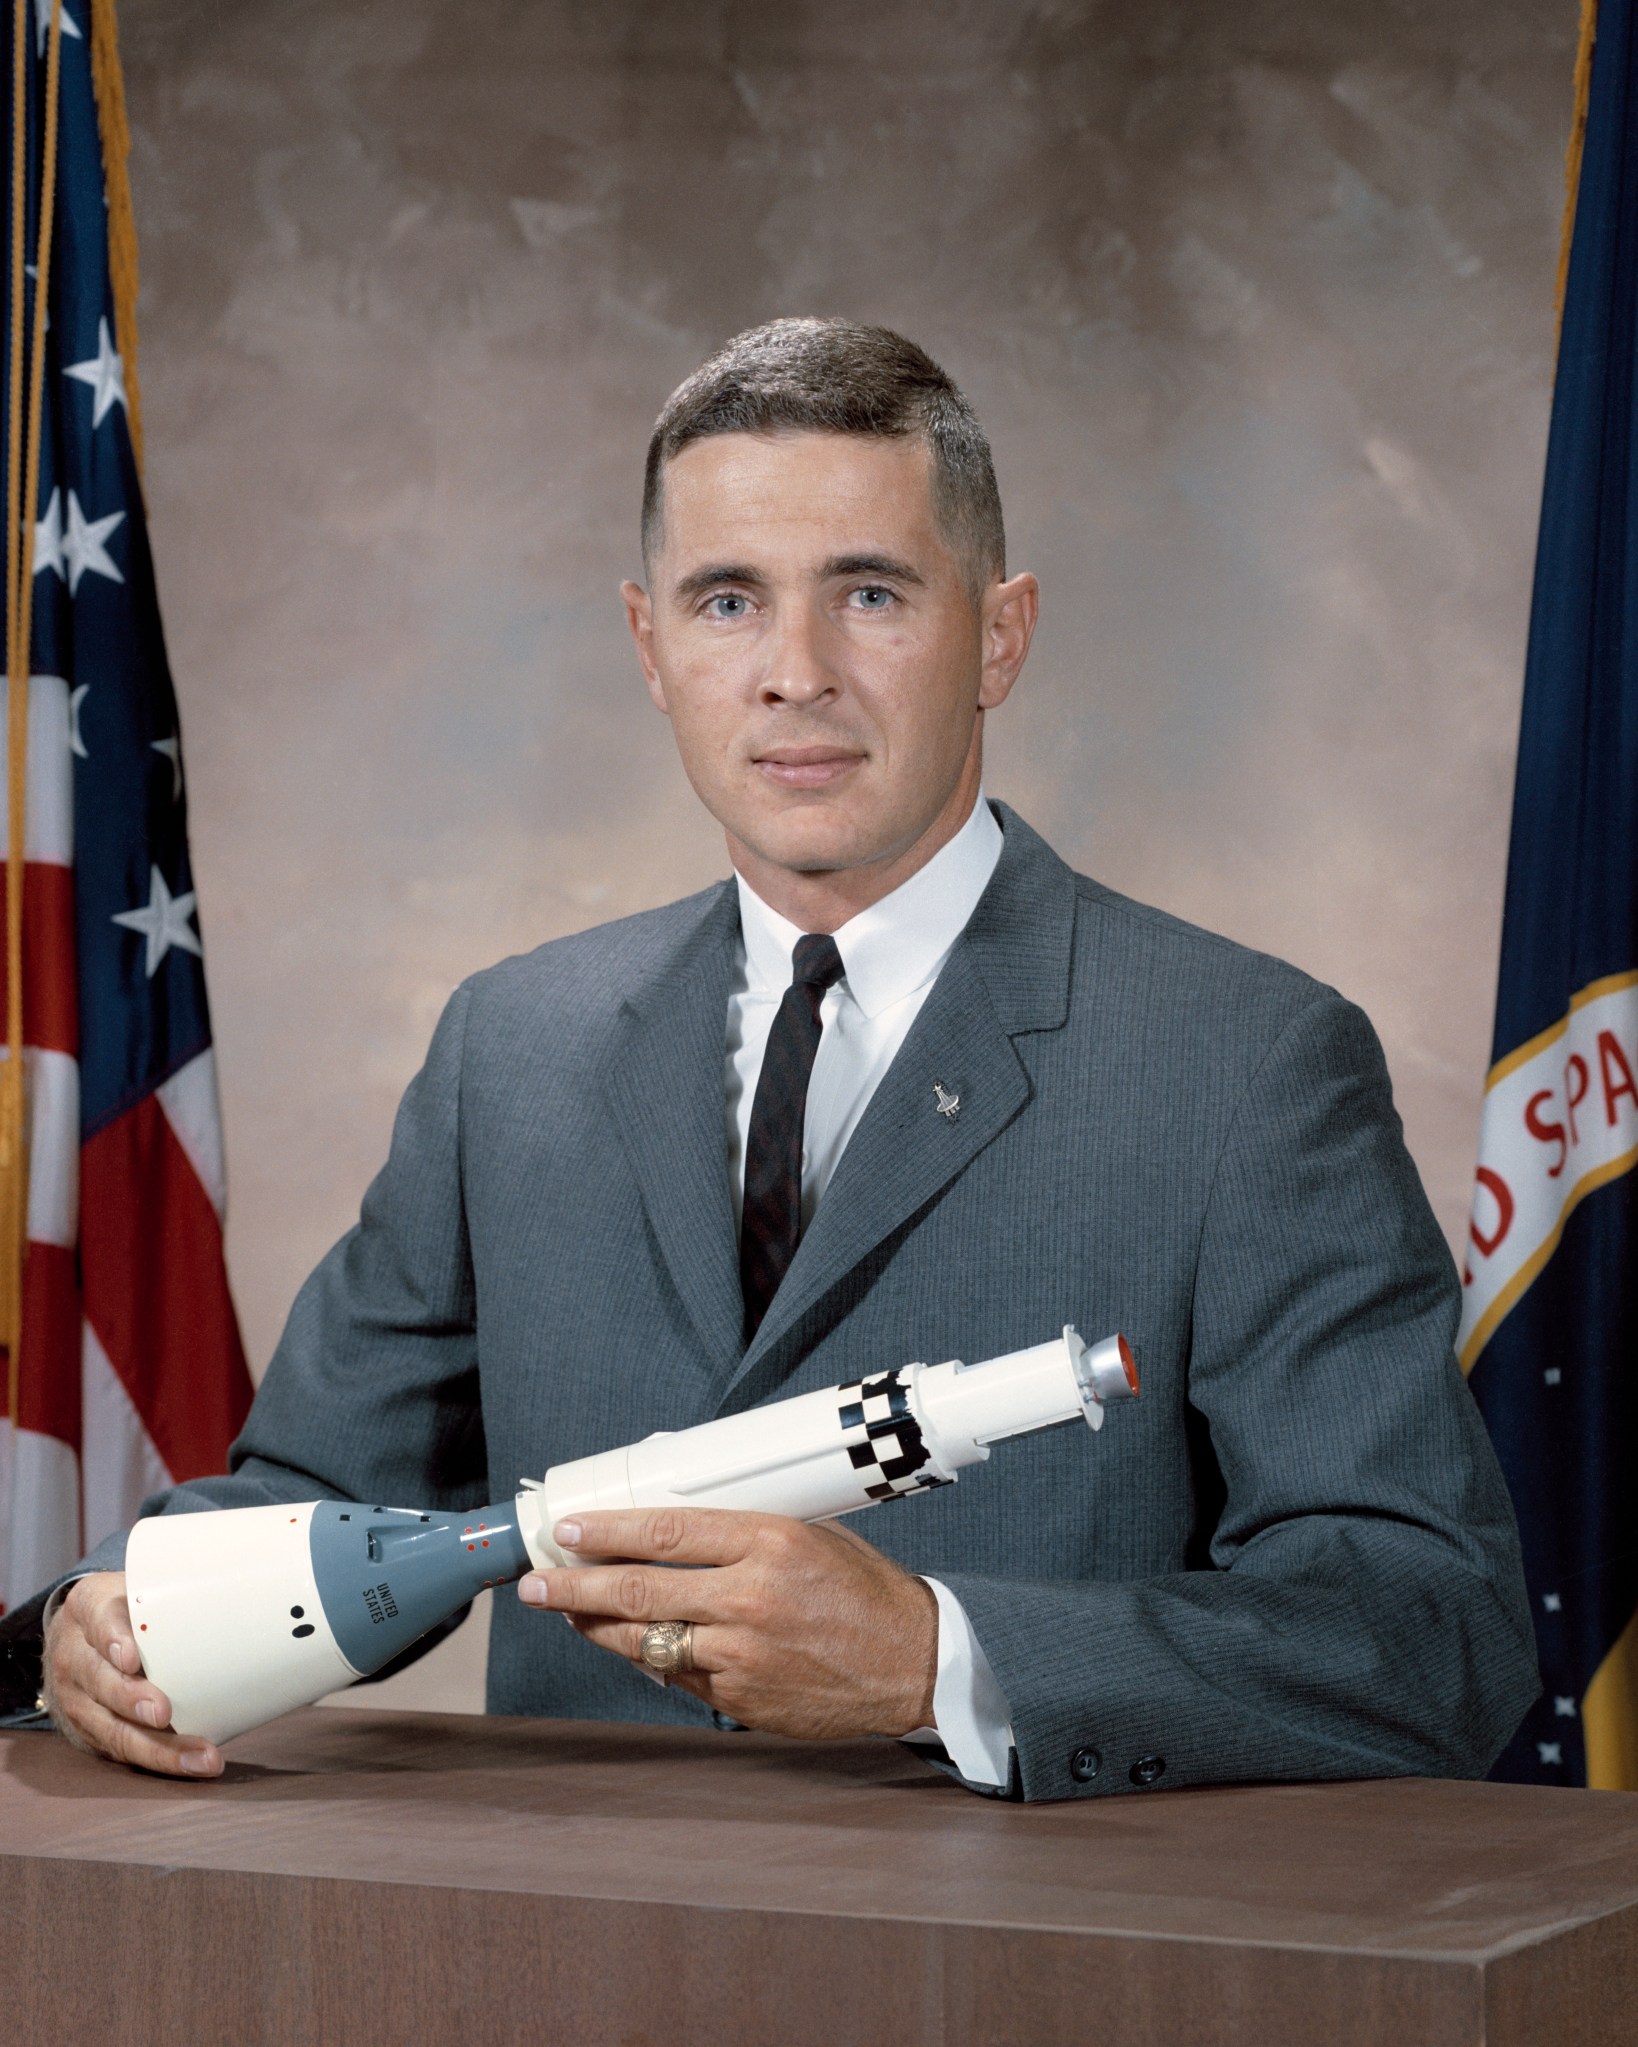 NASA astroanut William Anders poses for his official portrait.